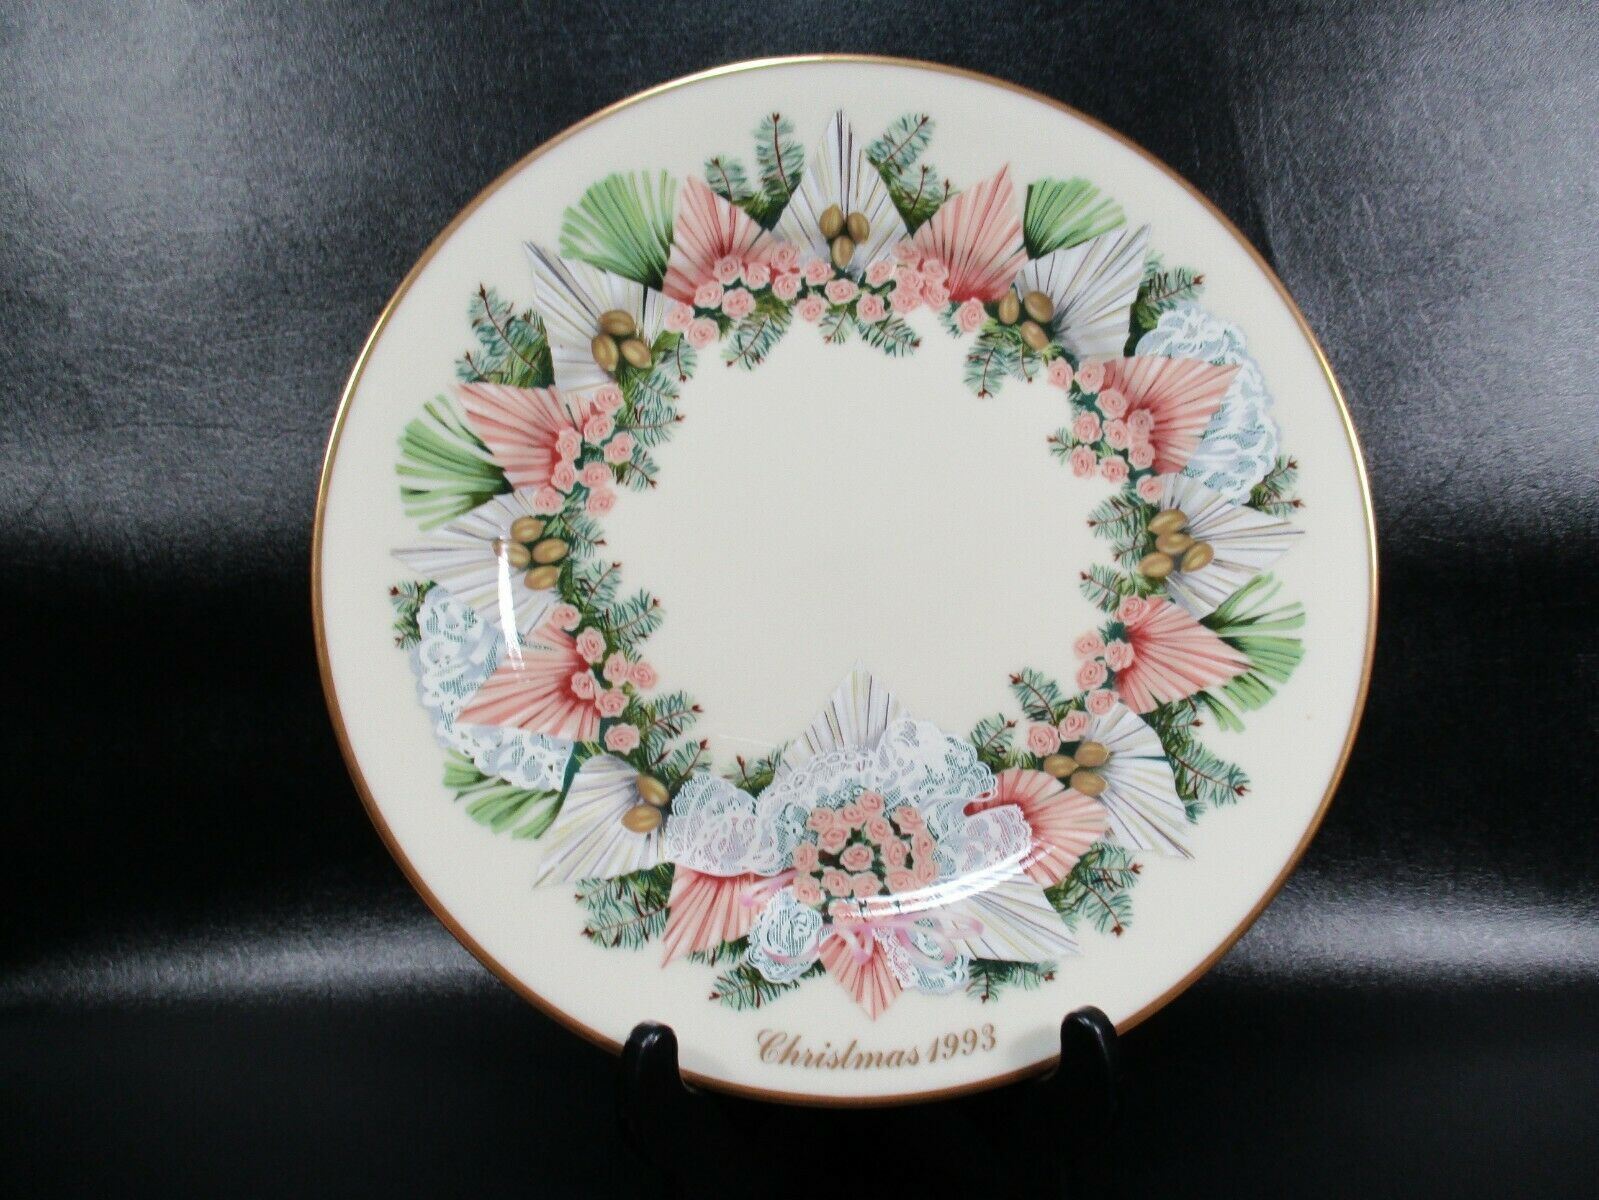 Lenox Colonial Christmas Wreath 1993 Collectors Plate - Georgia, The 13th Colony